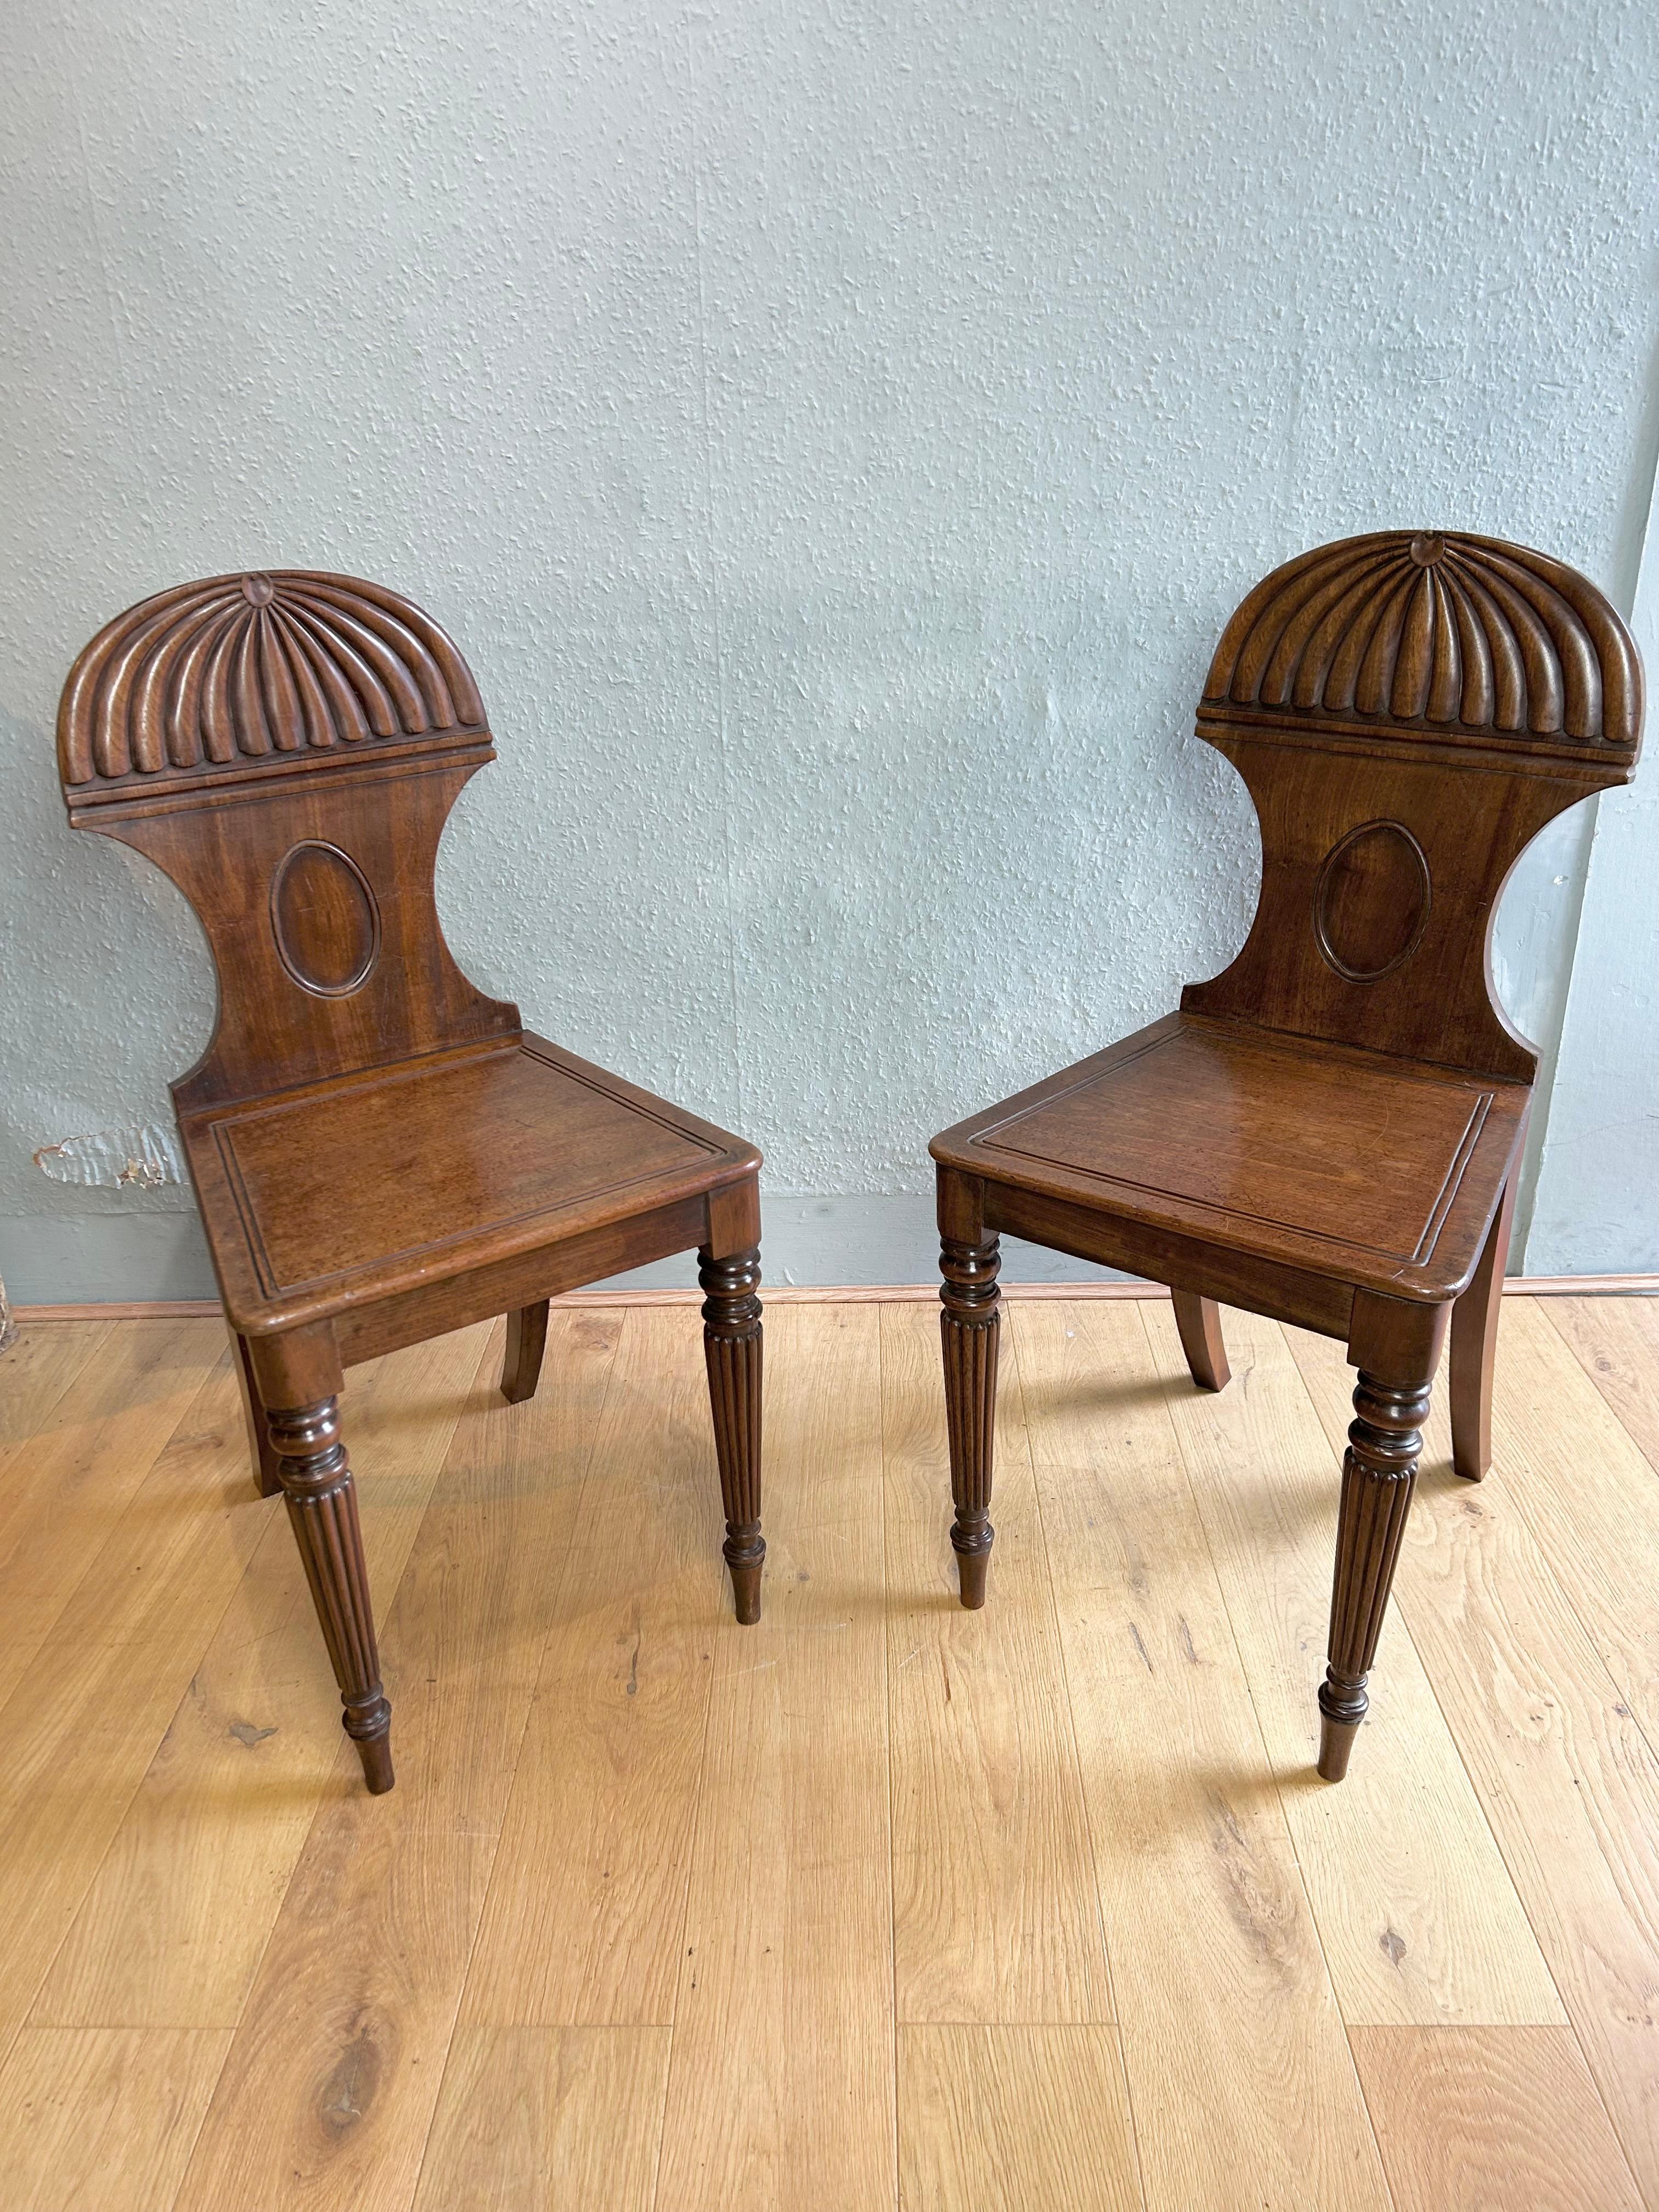 Pair of antique English Regency mahogany hall chairs attributed to Gillows of Lancaster and London circa 1815 with a classic carved dragooned canopy, moulded seat resting on fine reeded turned legs of typical Gillows design, chairs retain their